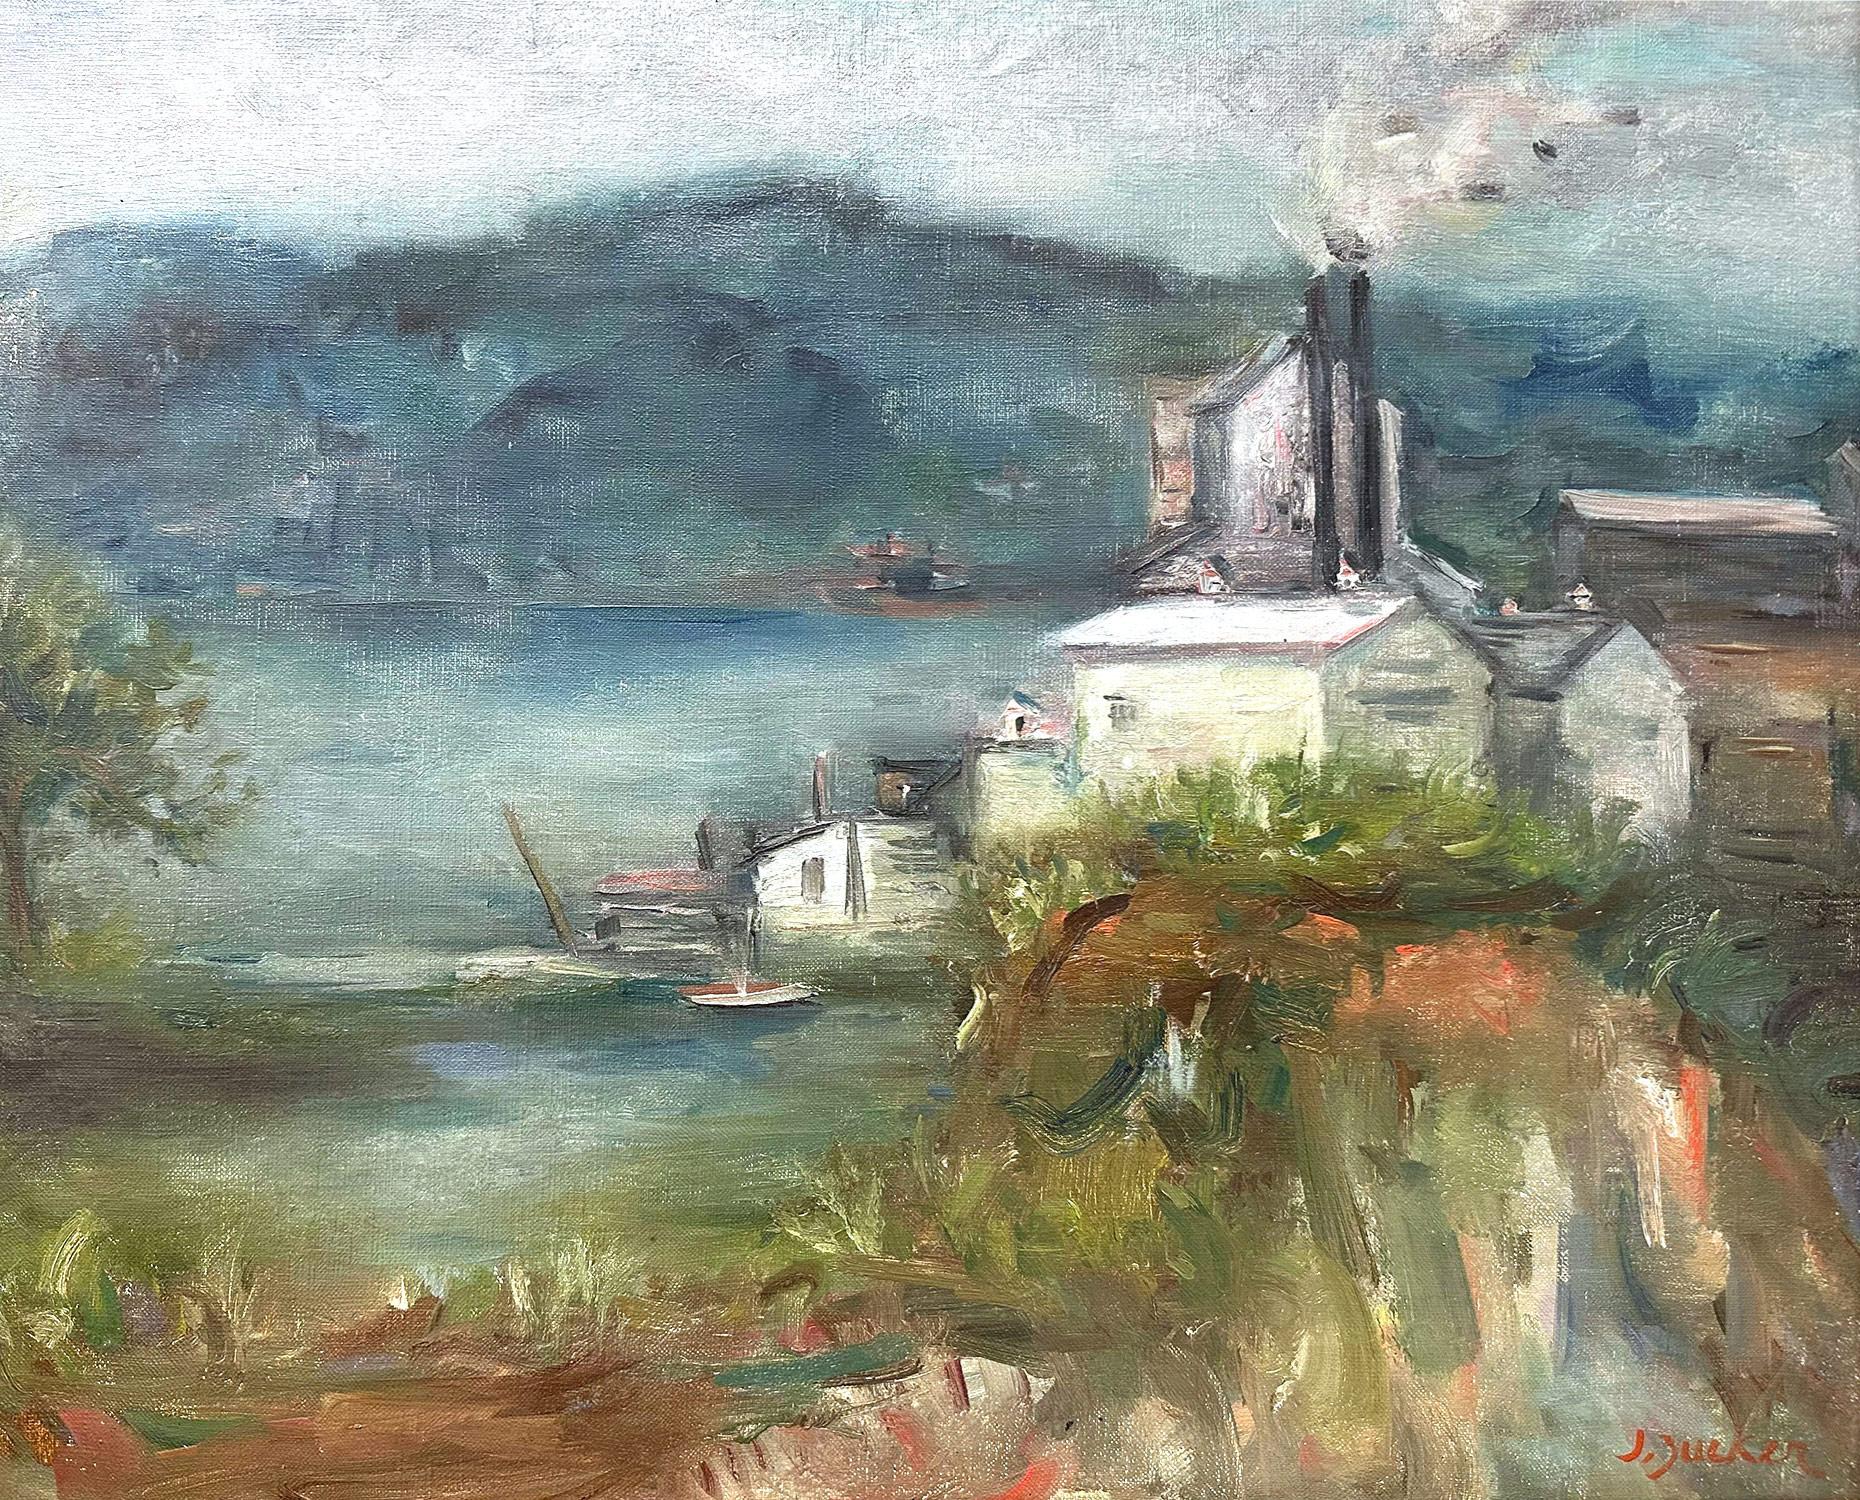 This painting depicts a whimsical landscape of an industrial town harbor with the village houses and buildings ashore, with a few boats docked and at the distance in the background, some tall mountains that framed the composition. The bright colors